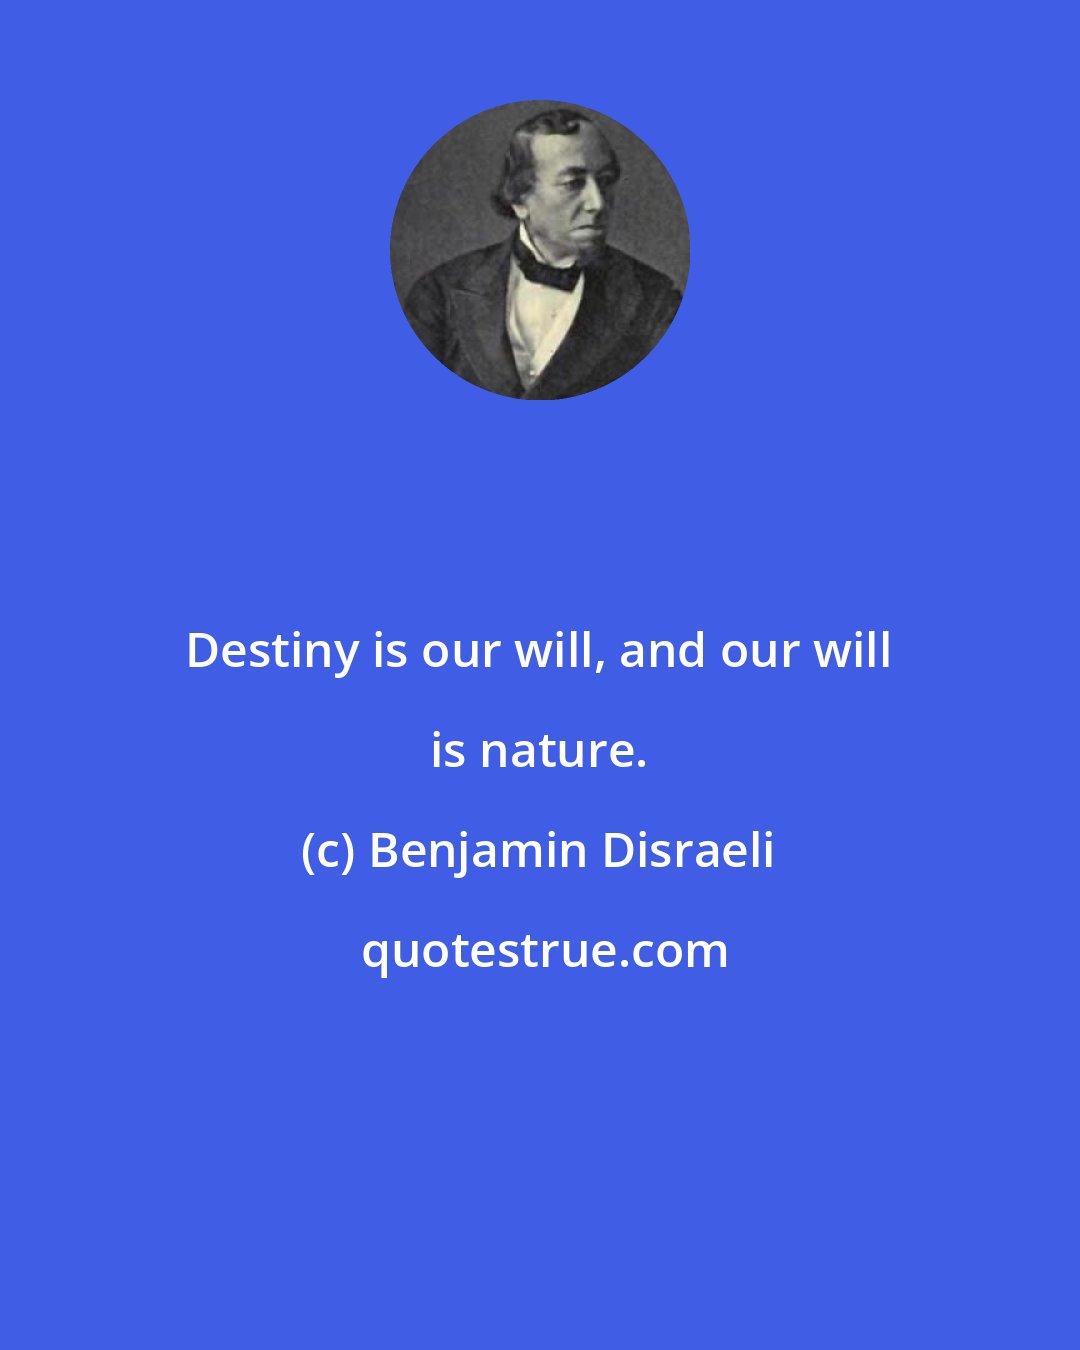 Benjamin Disraeli: Destiny is our will, and our will is nature.